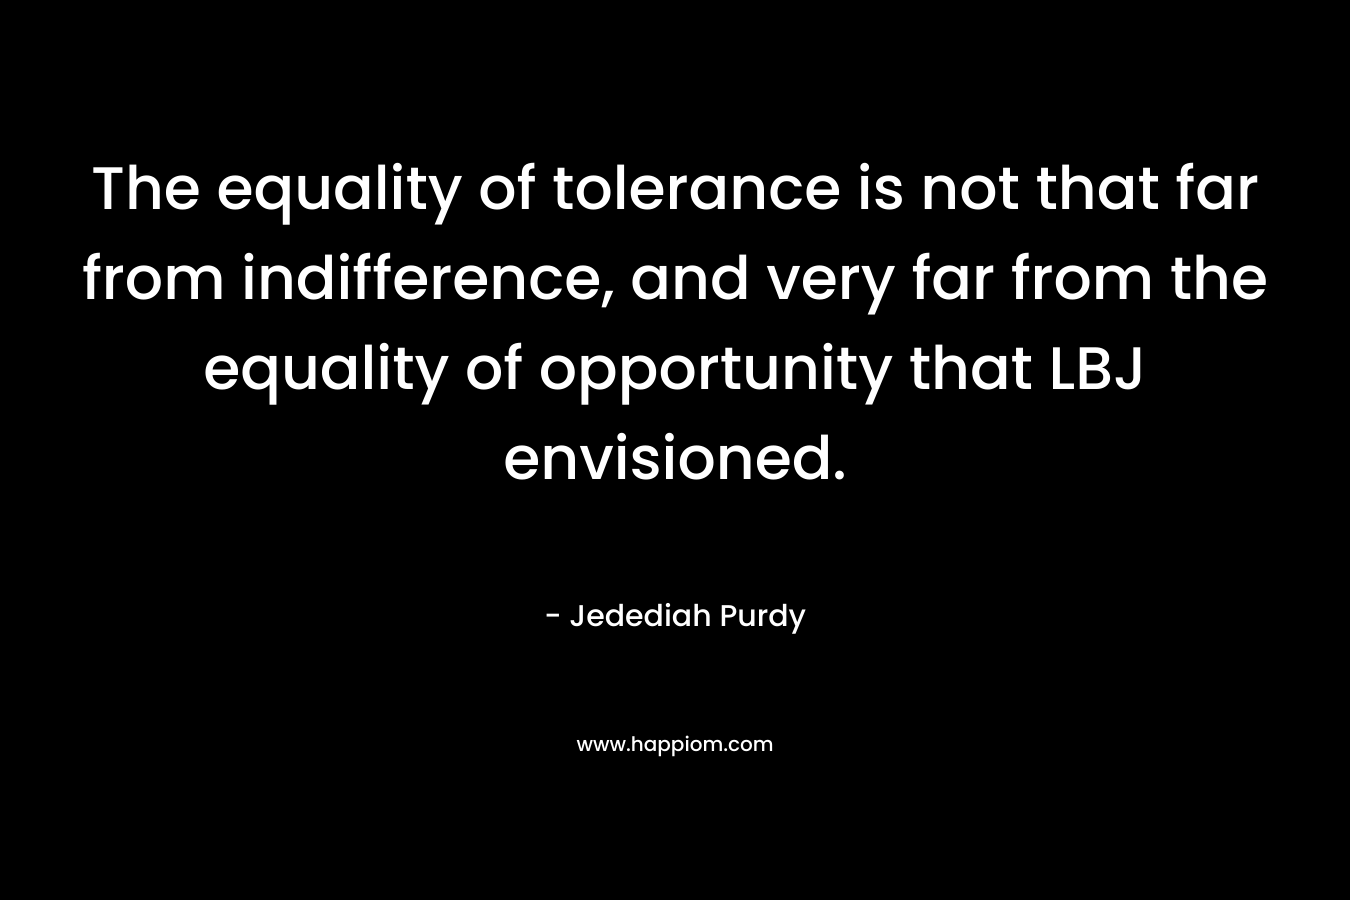 The equality of tolerance is not that far from indifference, and very far from the equality of opportunity that LBJ envisioned. – Jedediah Purdy